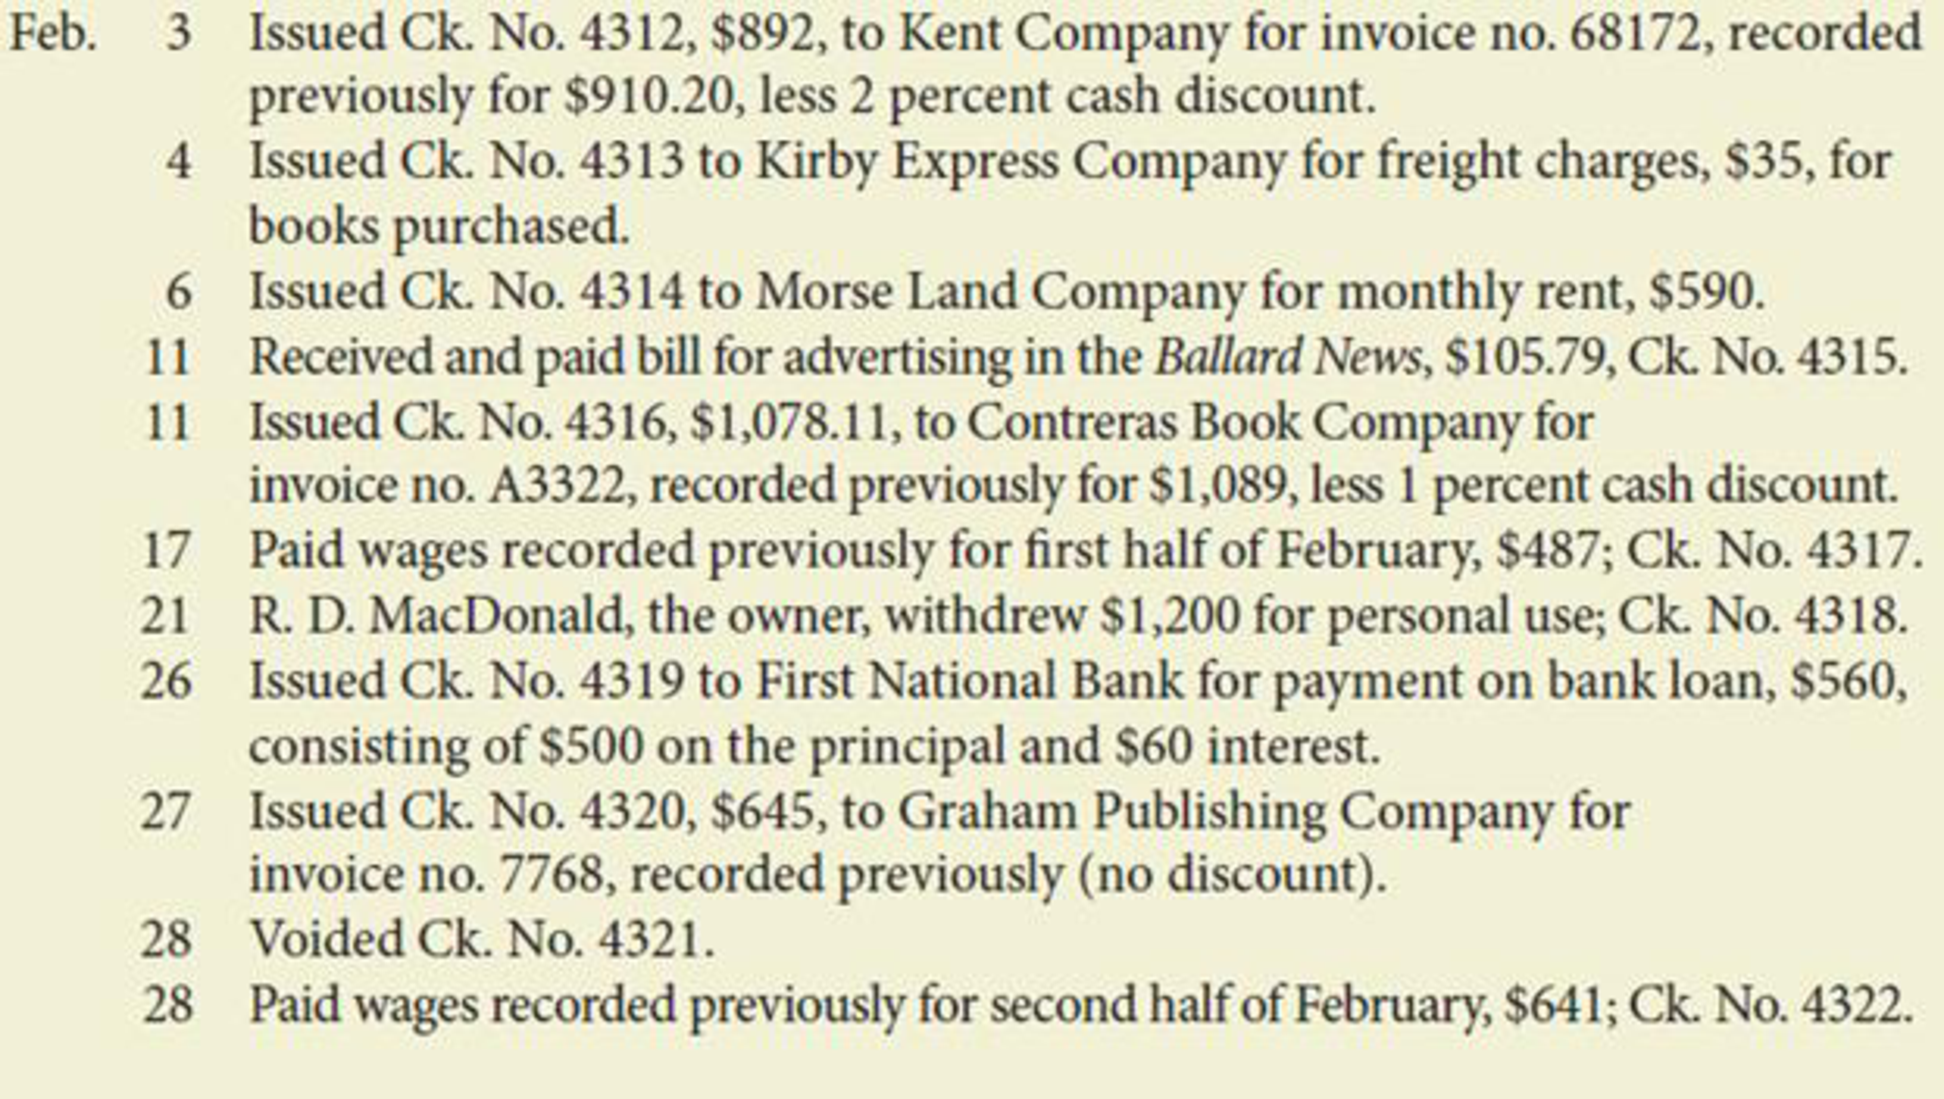 Chapter 10, Problem 3PA, MacDonald Bookshop had the following transactions that occurred during February of this year: 